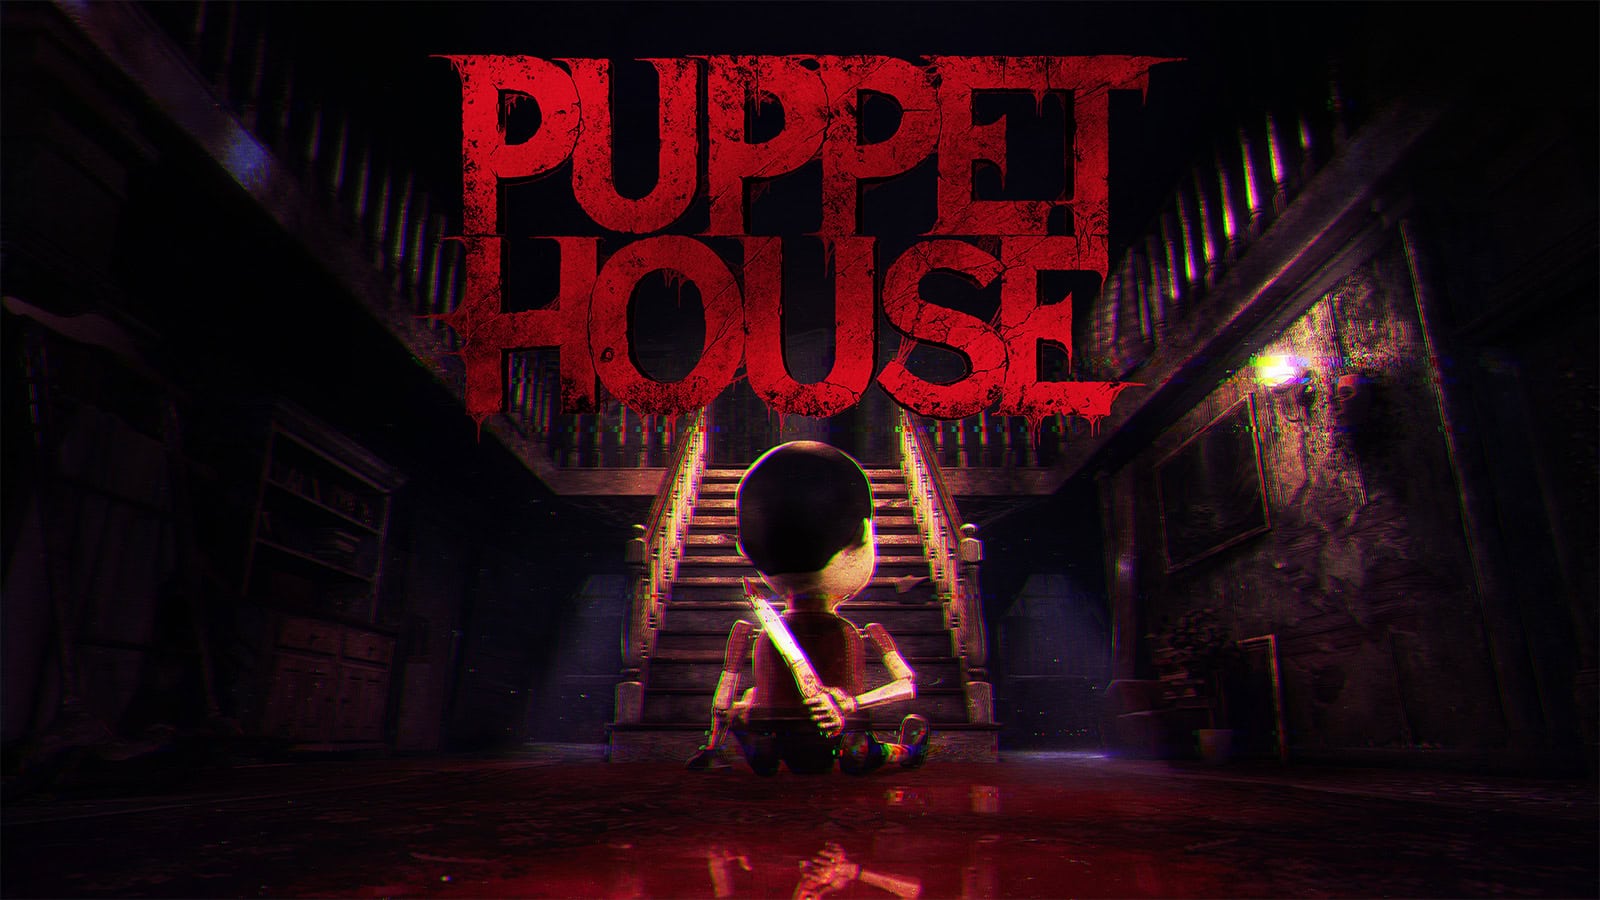 The official art for horror game Puppet House, showing the killer puppet within a haunted house